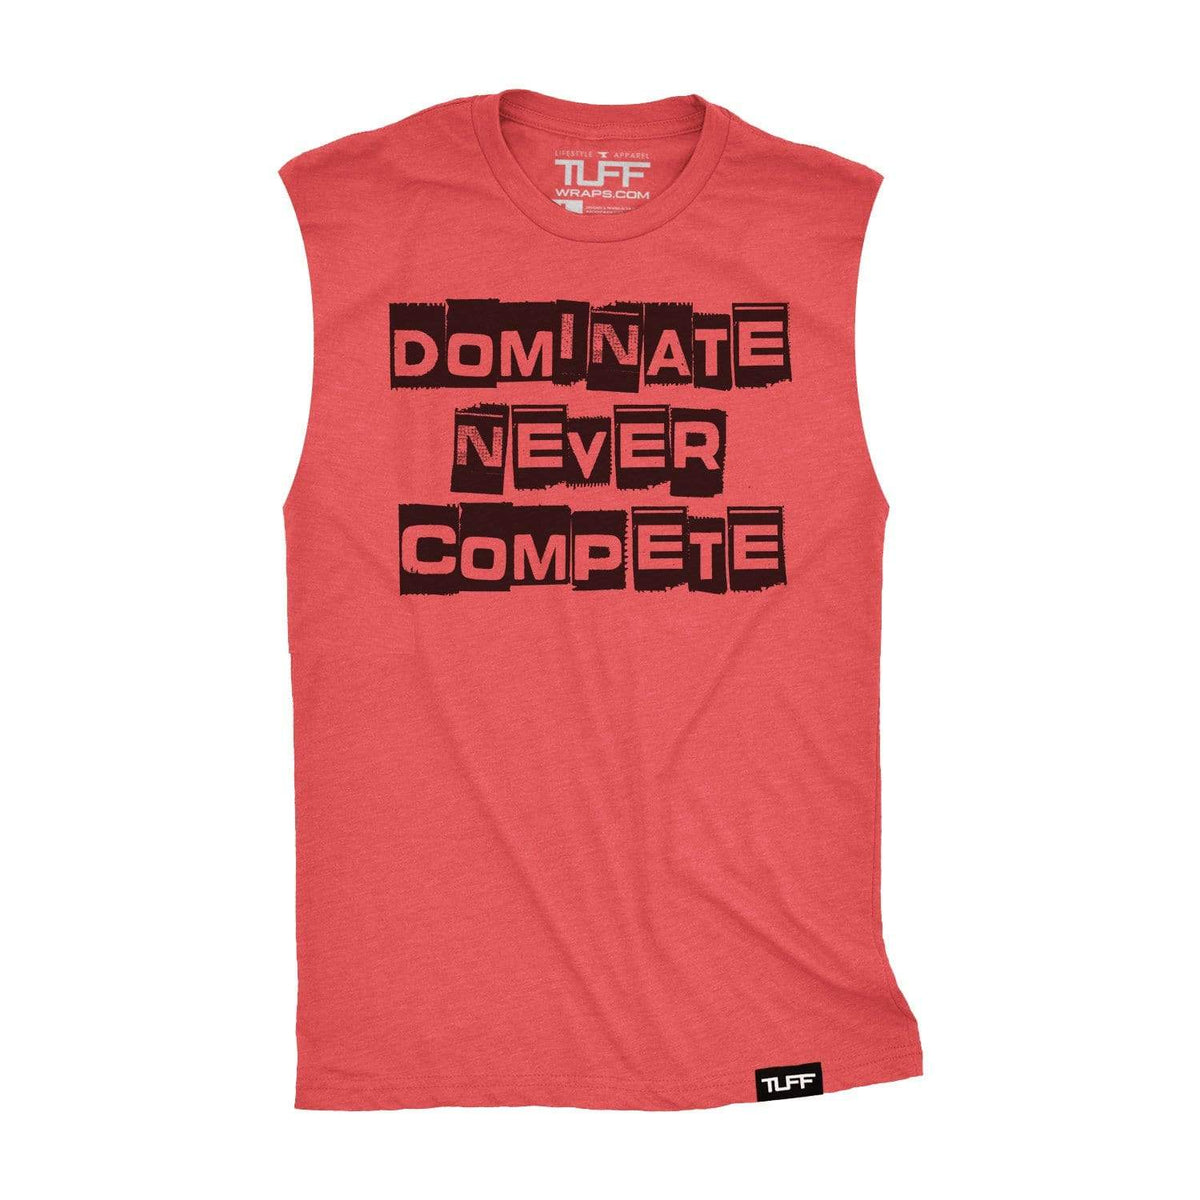 Dominate Never Compete Raw Edge Muscle Tank S / Vintage Red TuffWraps.com